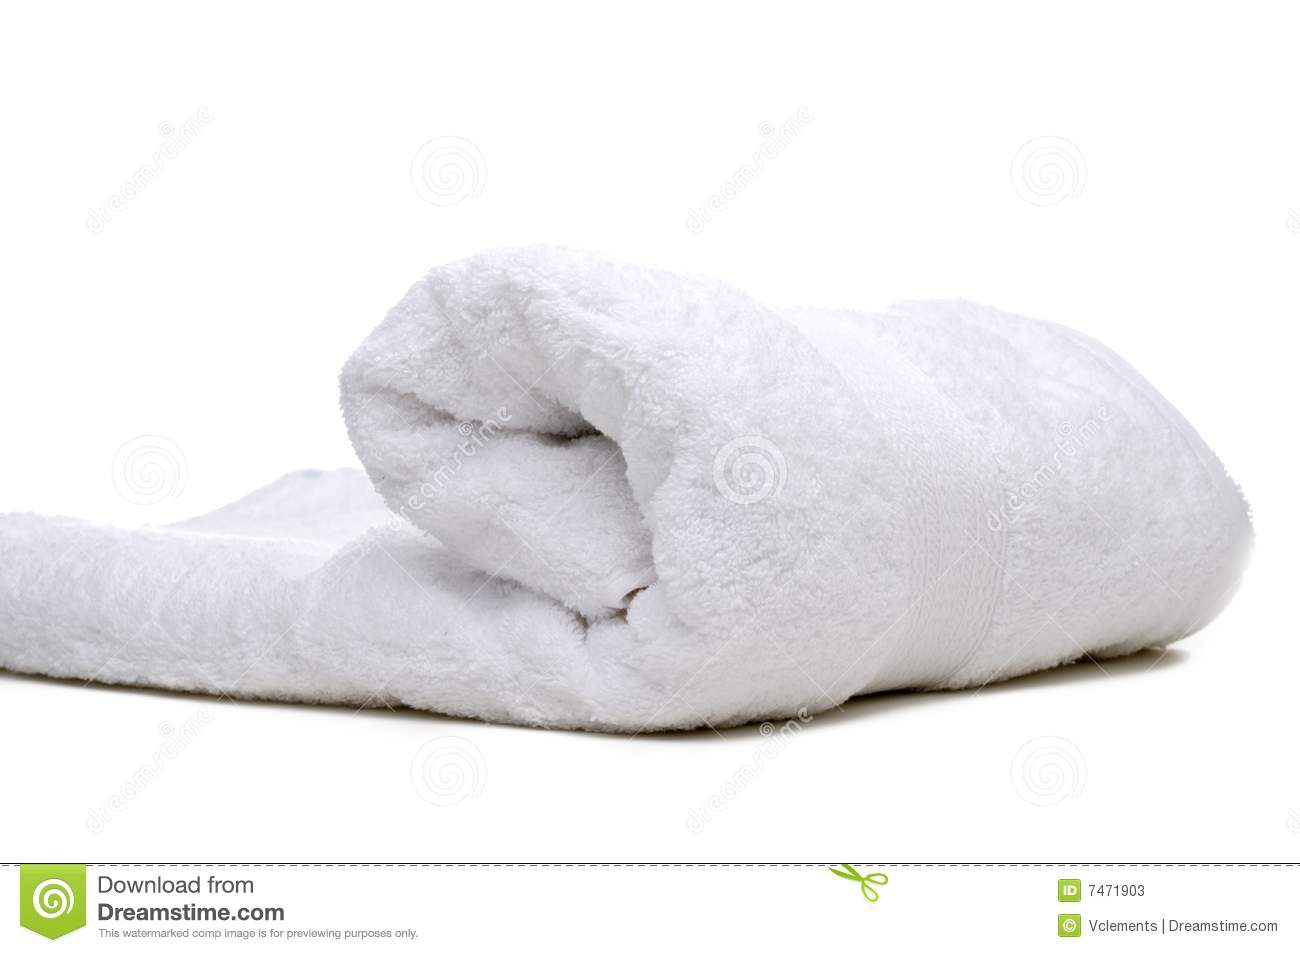 Rolled Up White Towel Stock Photos   Image  7471903